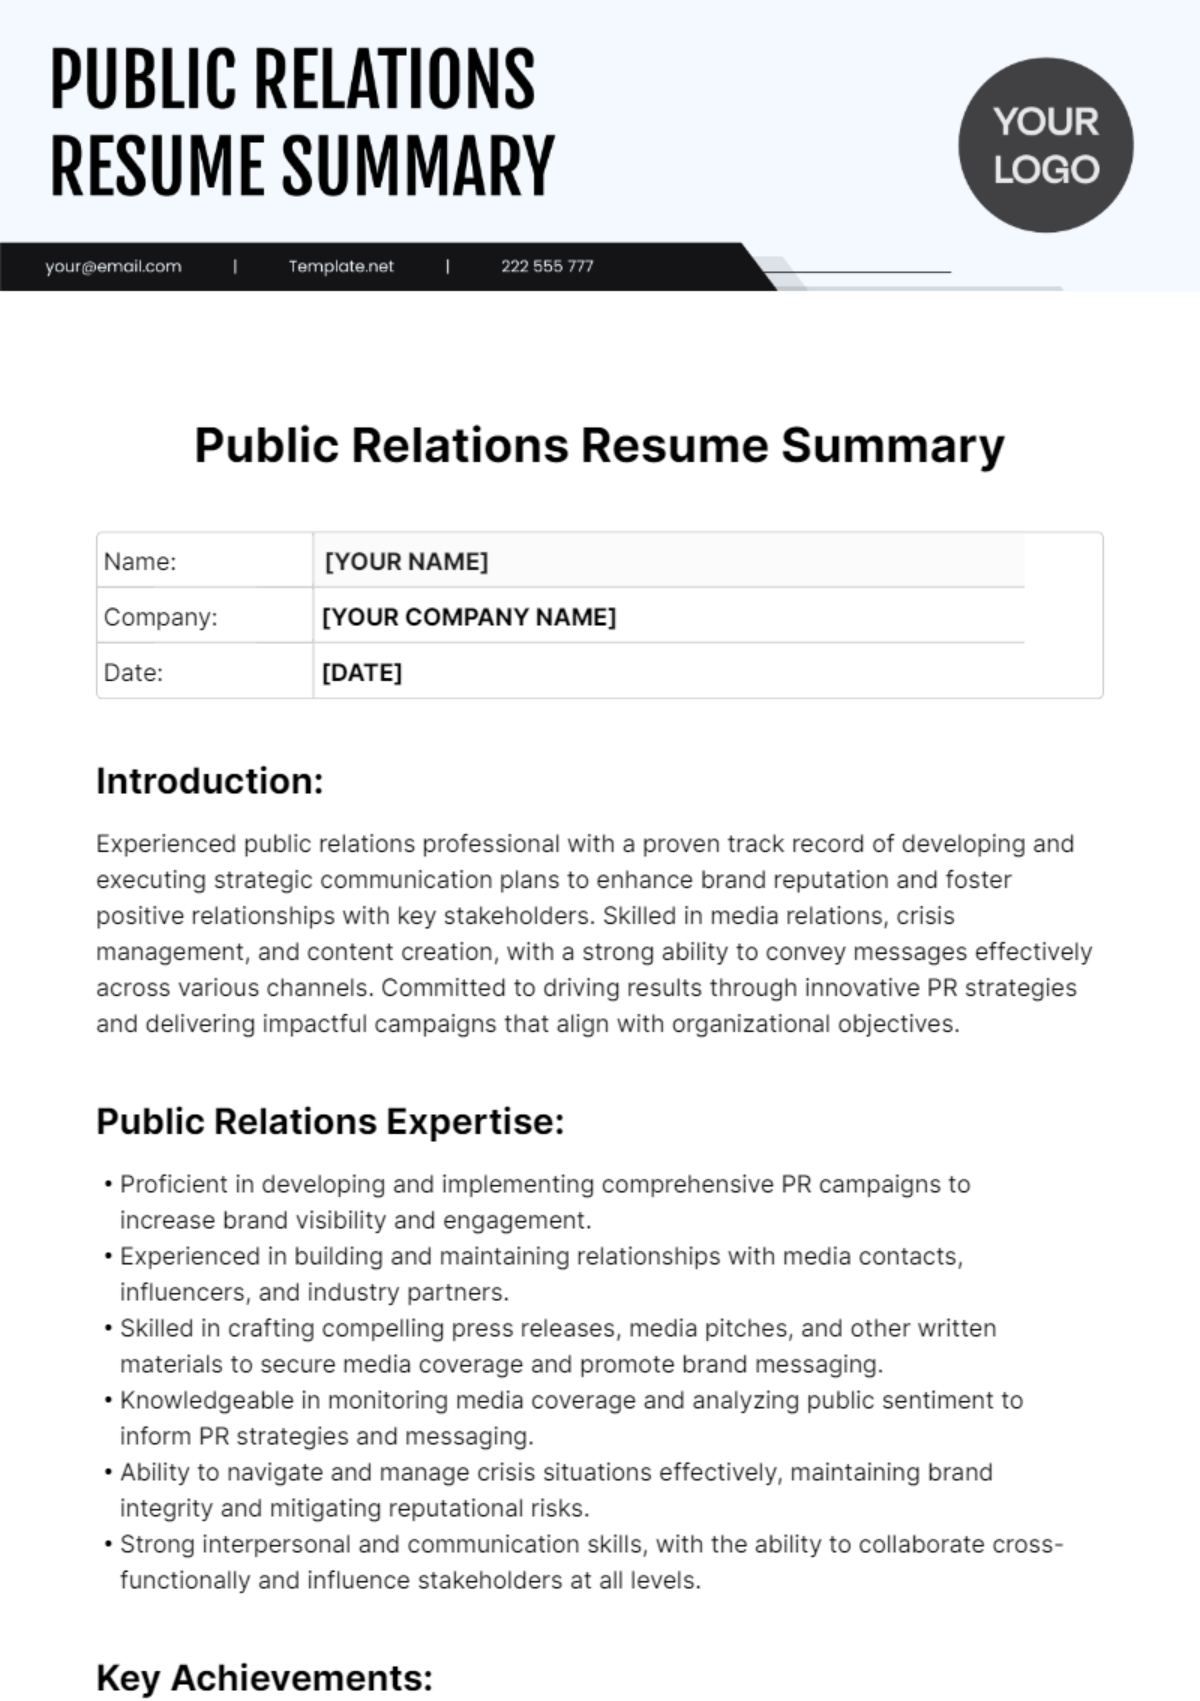 Public Relations Resume Summary Template